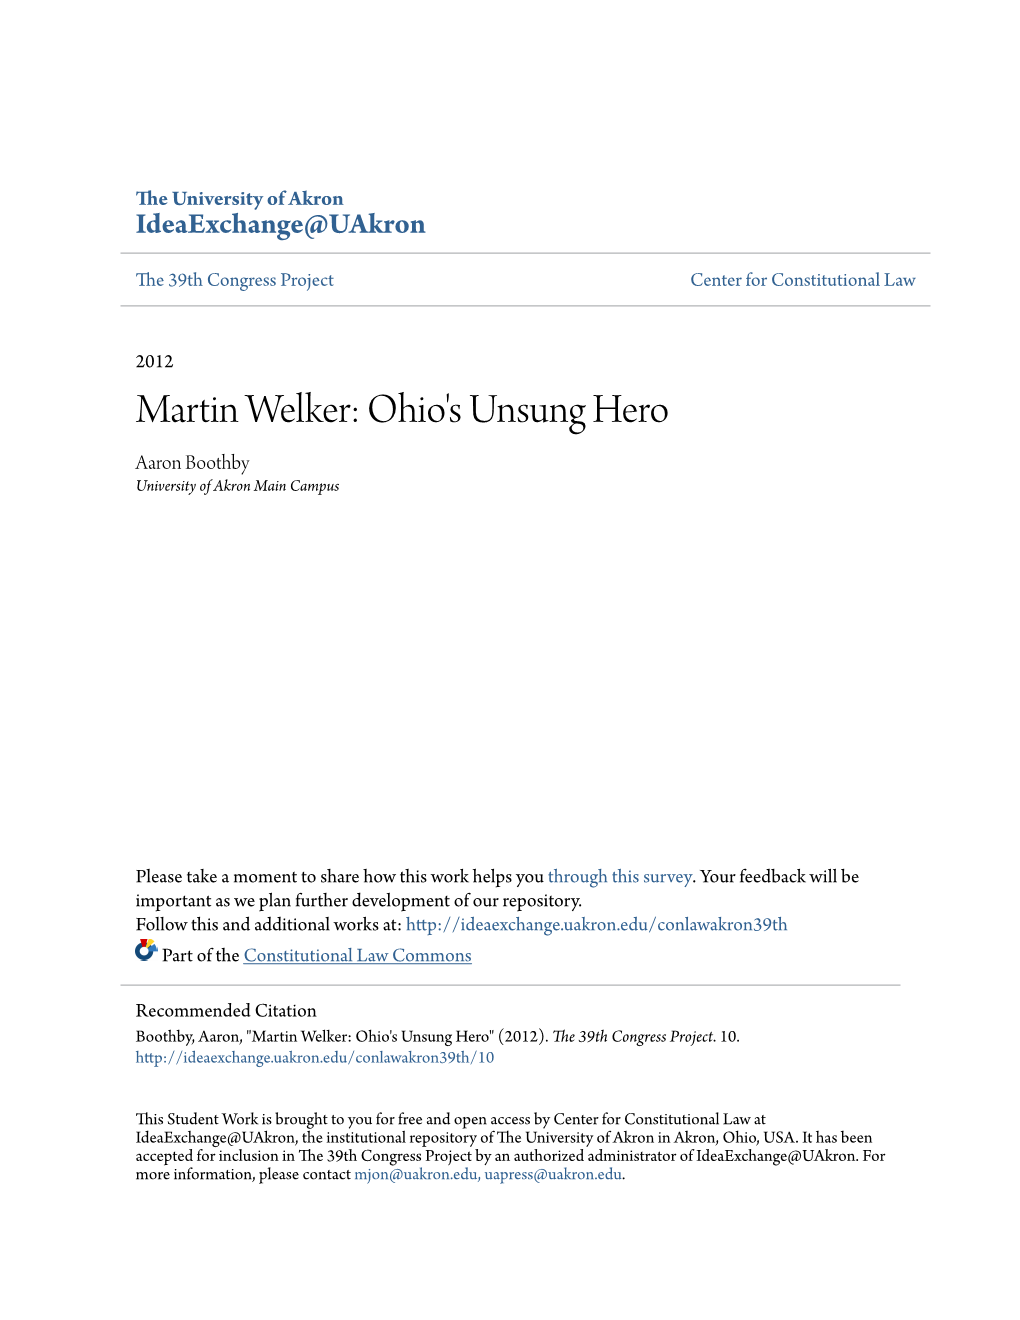 Martin Welker: Ohio's Unsung Hero Aaron Boothby University of Akron Main Campus